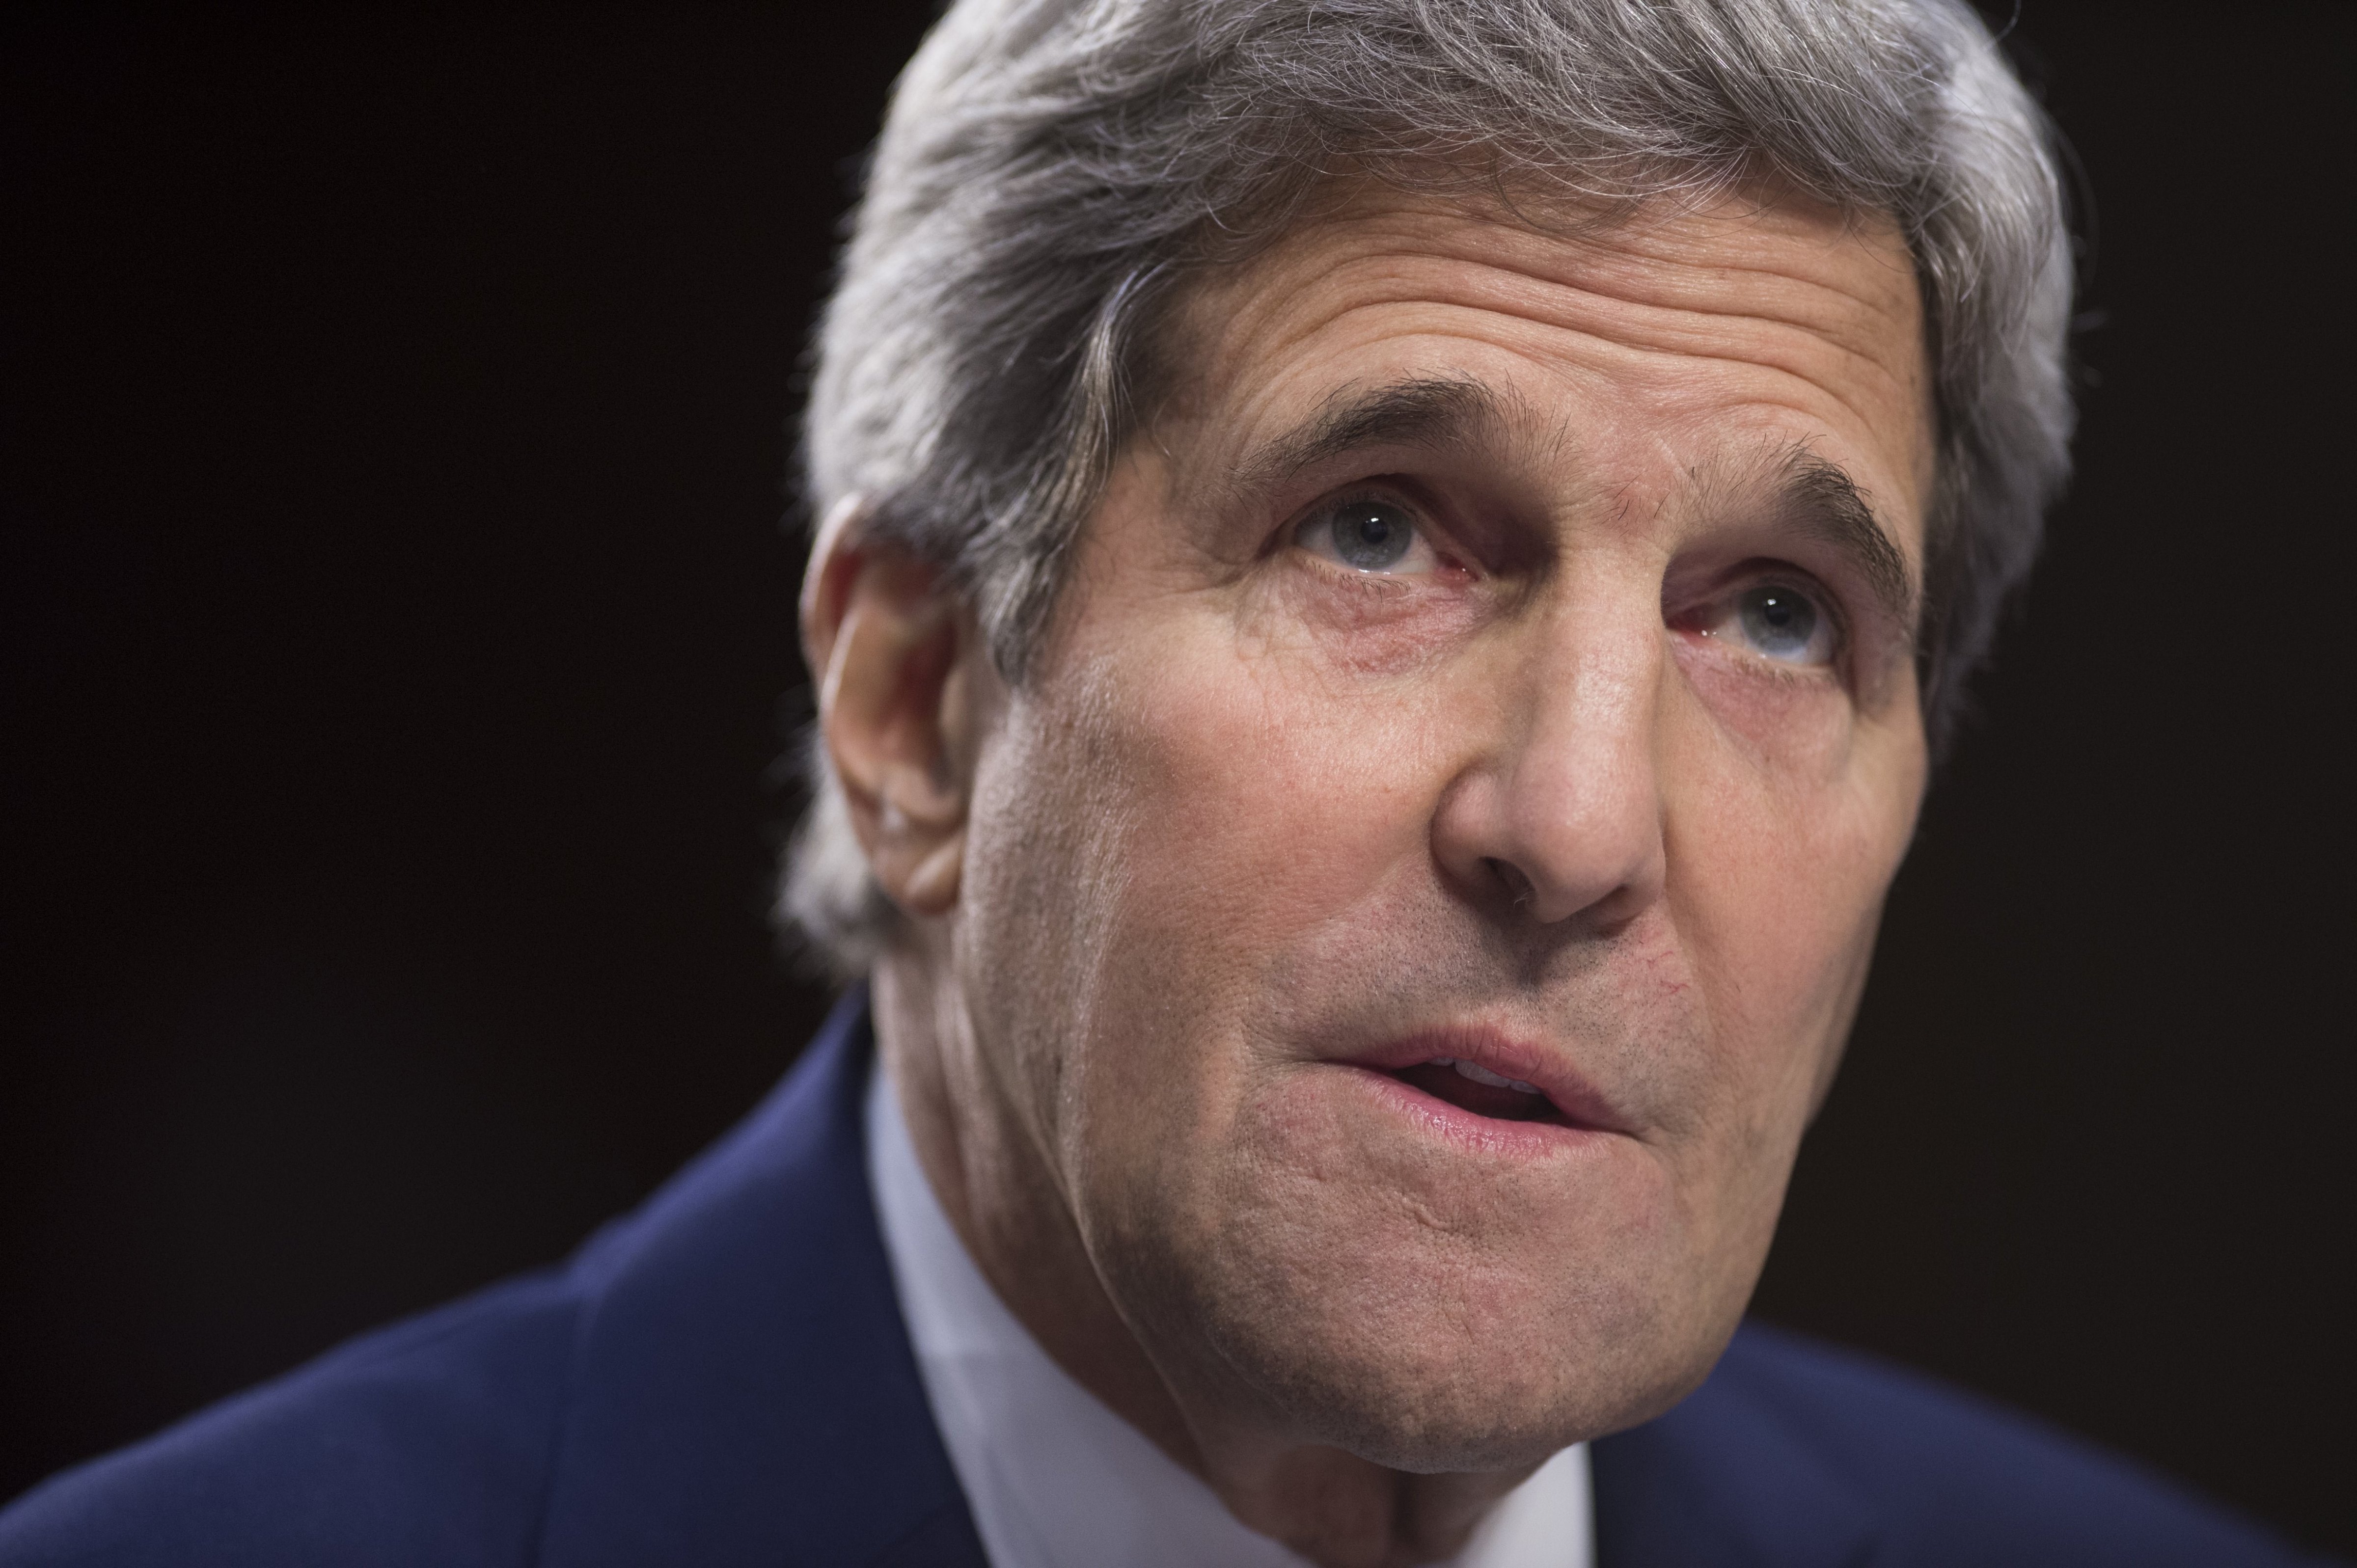 US Secretary of State John Kerry testifies about US policy towards Iraq and Syria and the threat posed by the Islamic State Group (IS) during a Senate Foreign Relations Committee hearing on Capitol Hill in Washington on Sept. 17, 2014. (Saul Loeb—AFP/Getty Images)